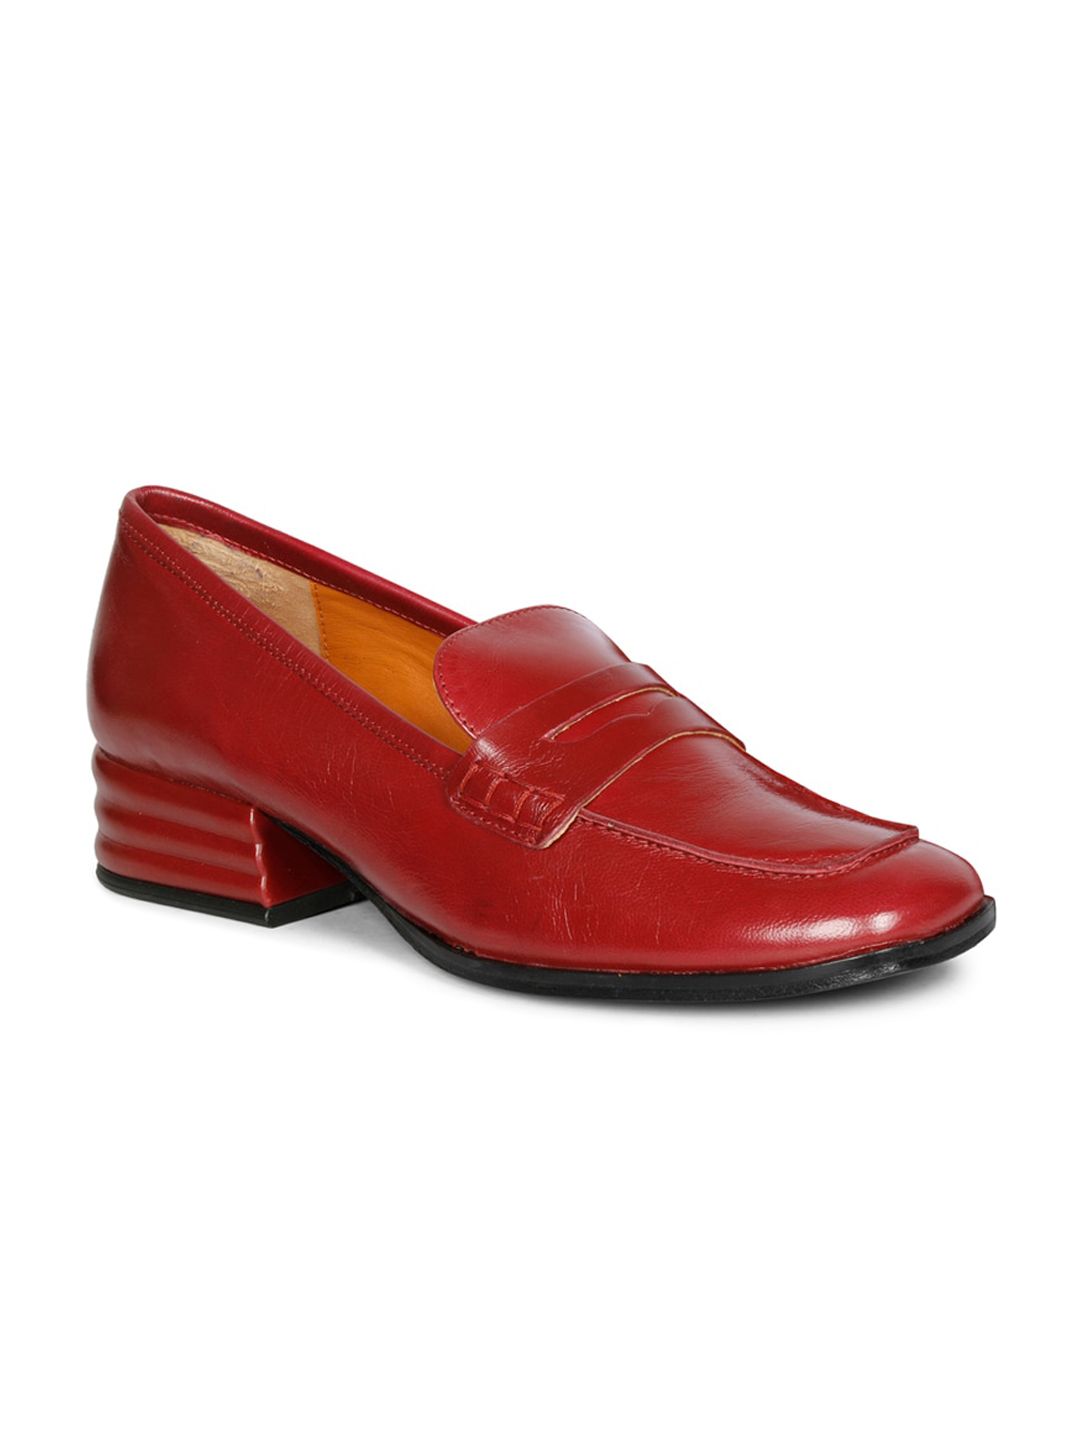 Saint G Women Leather Block Heeled Loafers Price in India